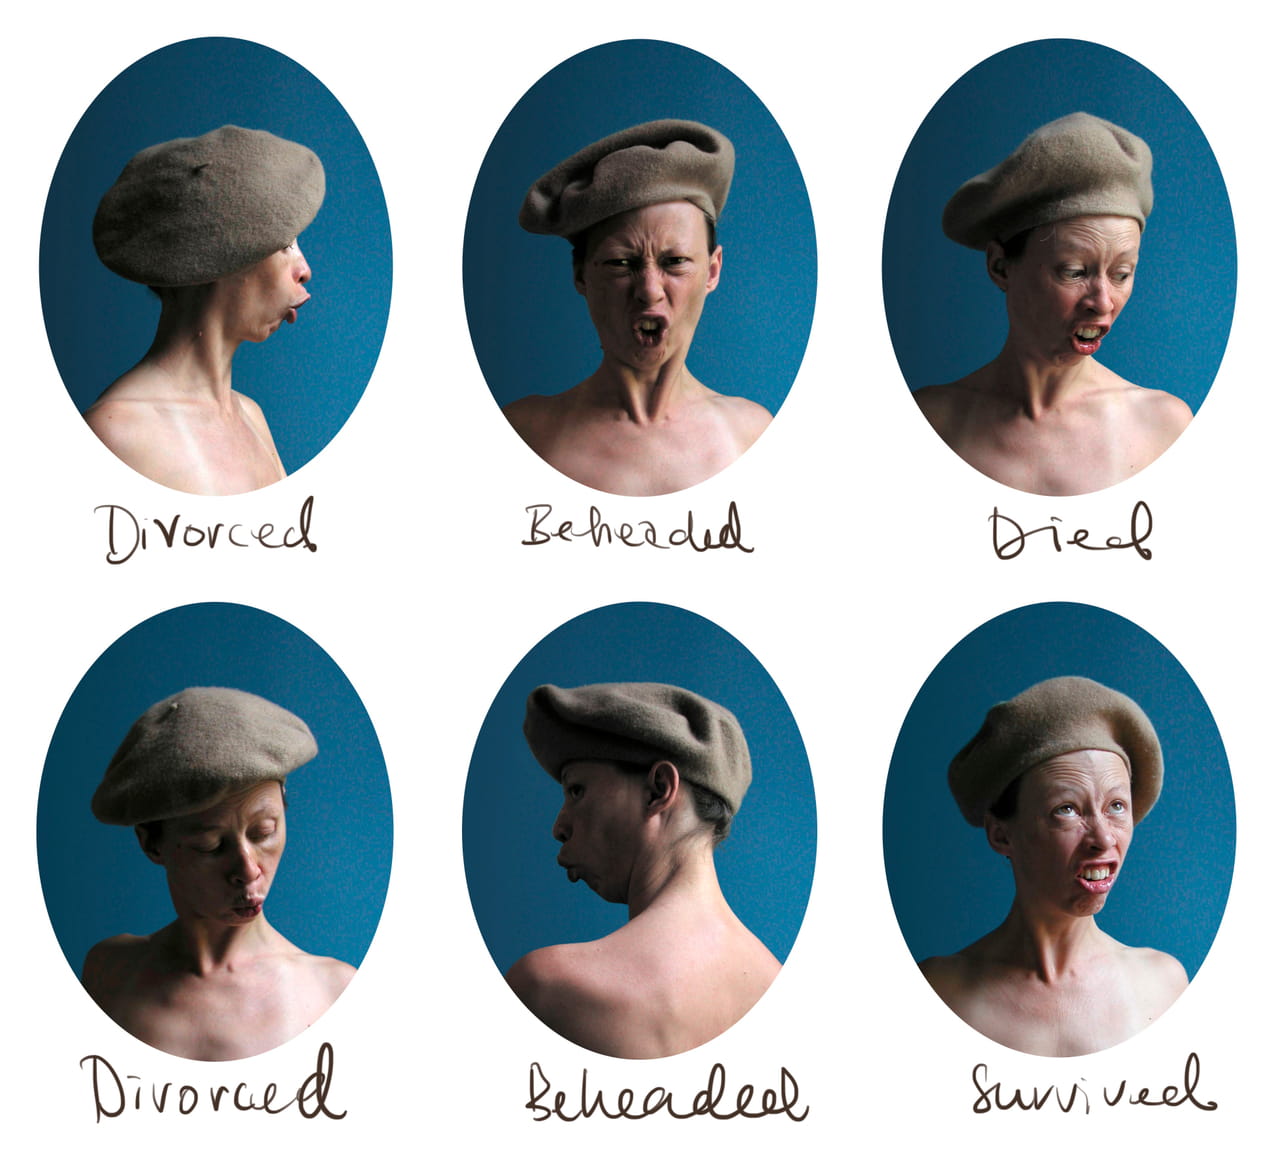 Set of 6 vignettes, each of a person with a different, exaggerated expression